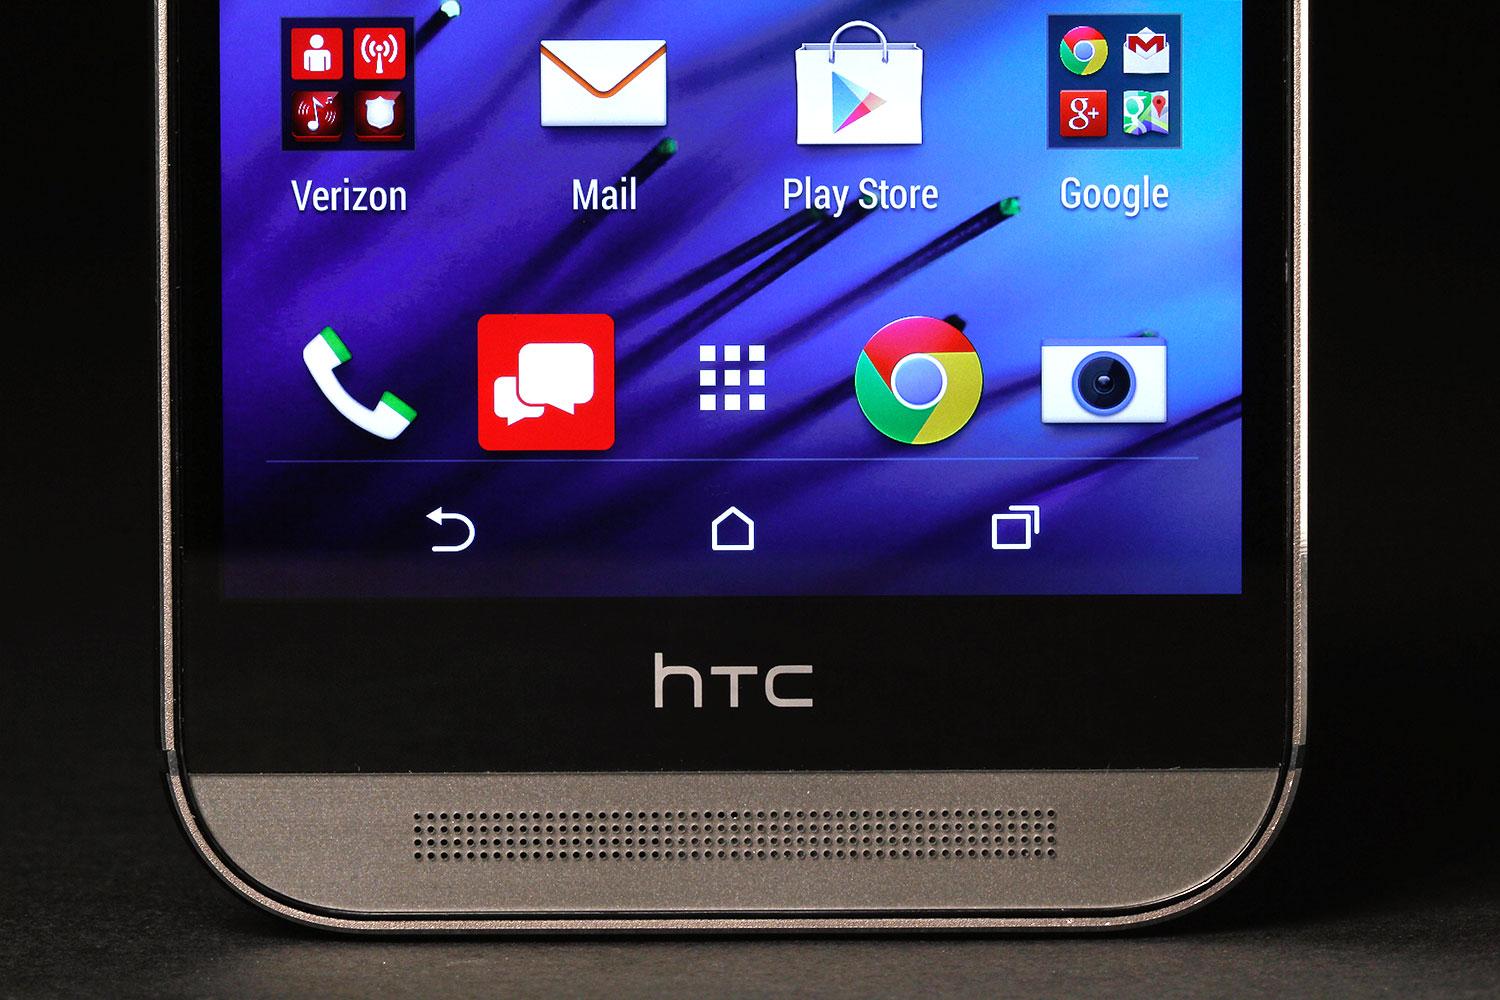 Word Plenary session Elegance HTC One M8: 20 Common Problems and How to Fix Them | Digital Trends